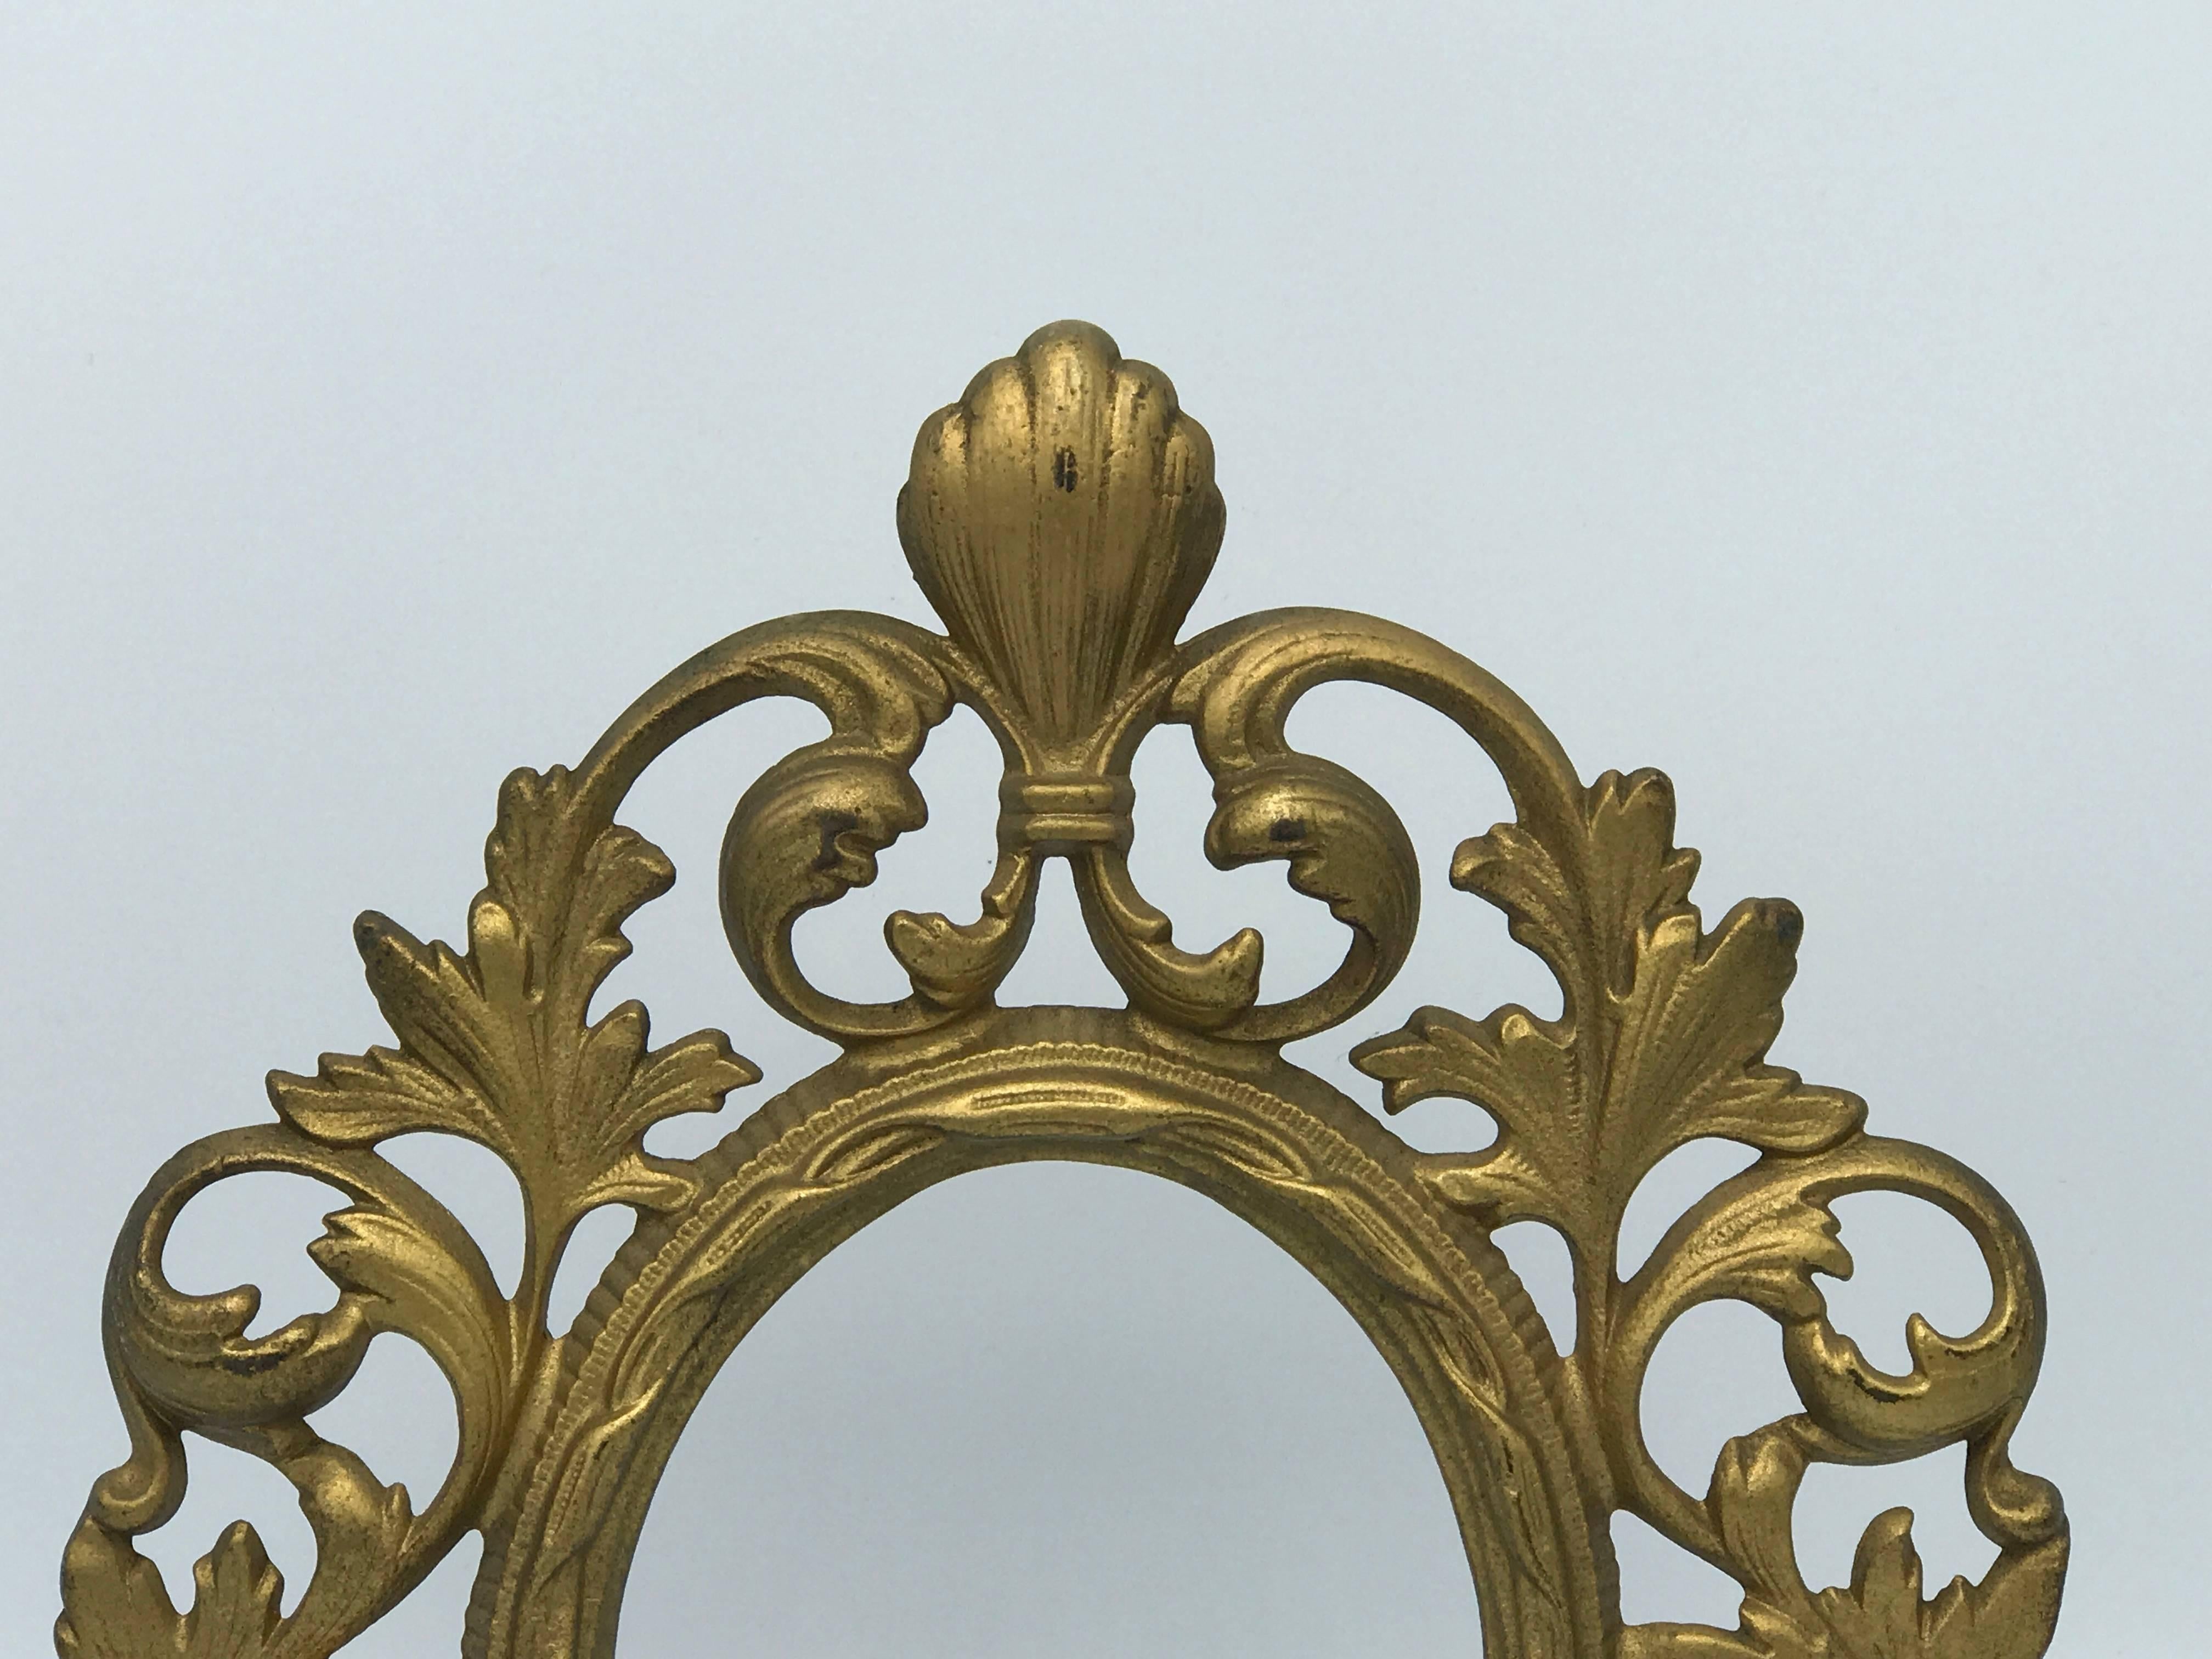 Offered is a stunning, 19th century gilt bronze standing picture frame. Glass not included.

Measures: Fits a 4" x 5" picture.